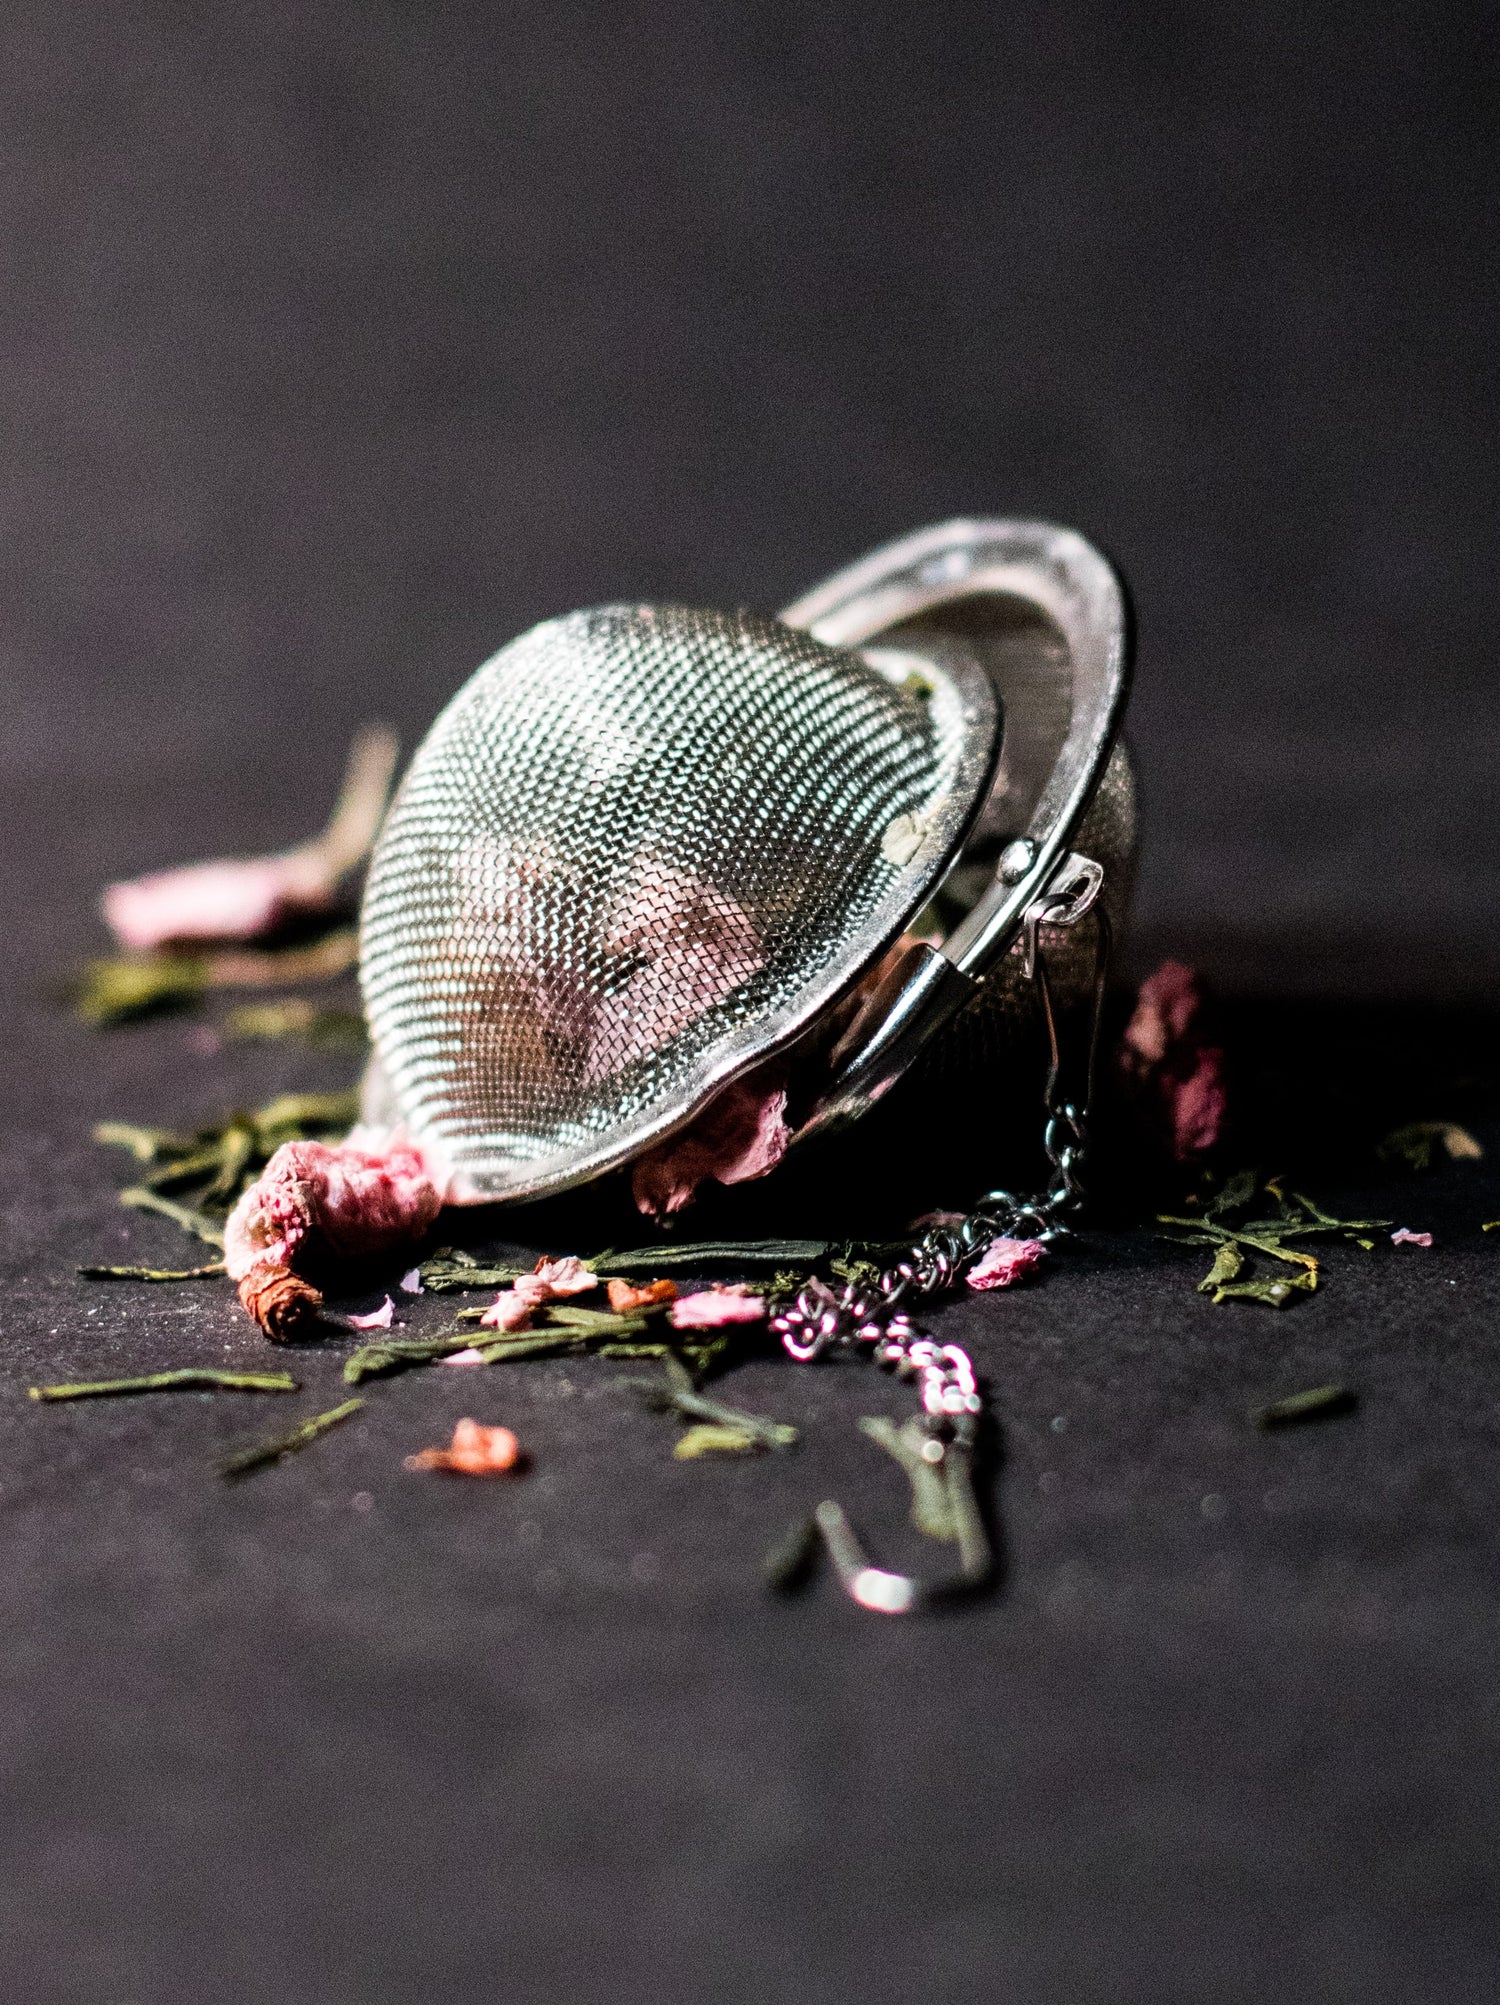 A mesh tea ball, slightly open, with green tea leaves and rose petals spilling from it